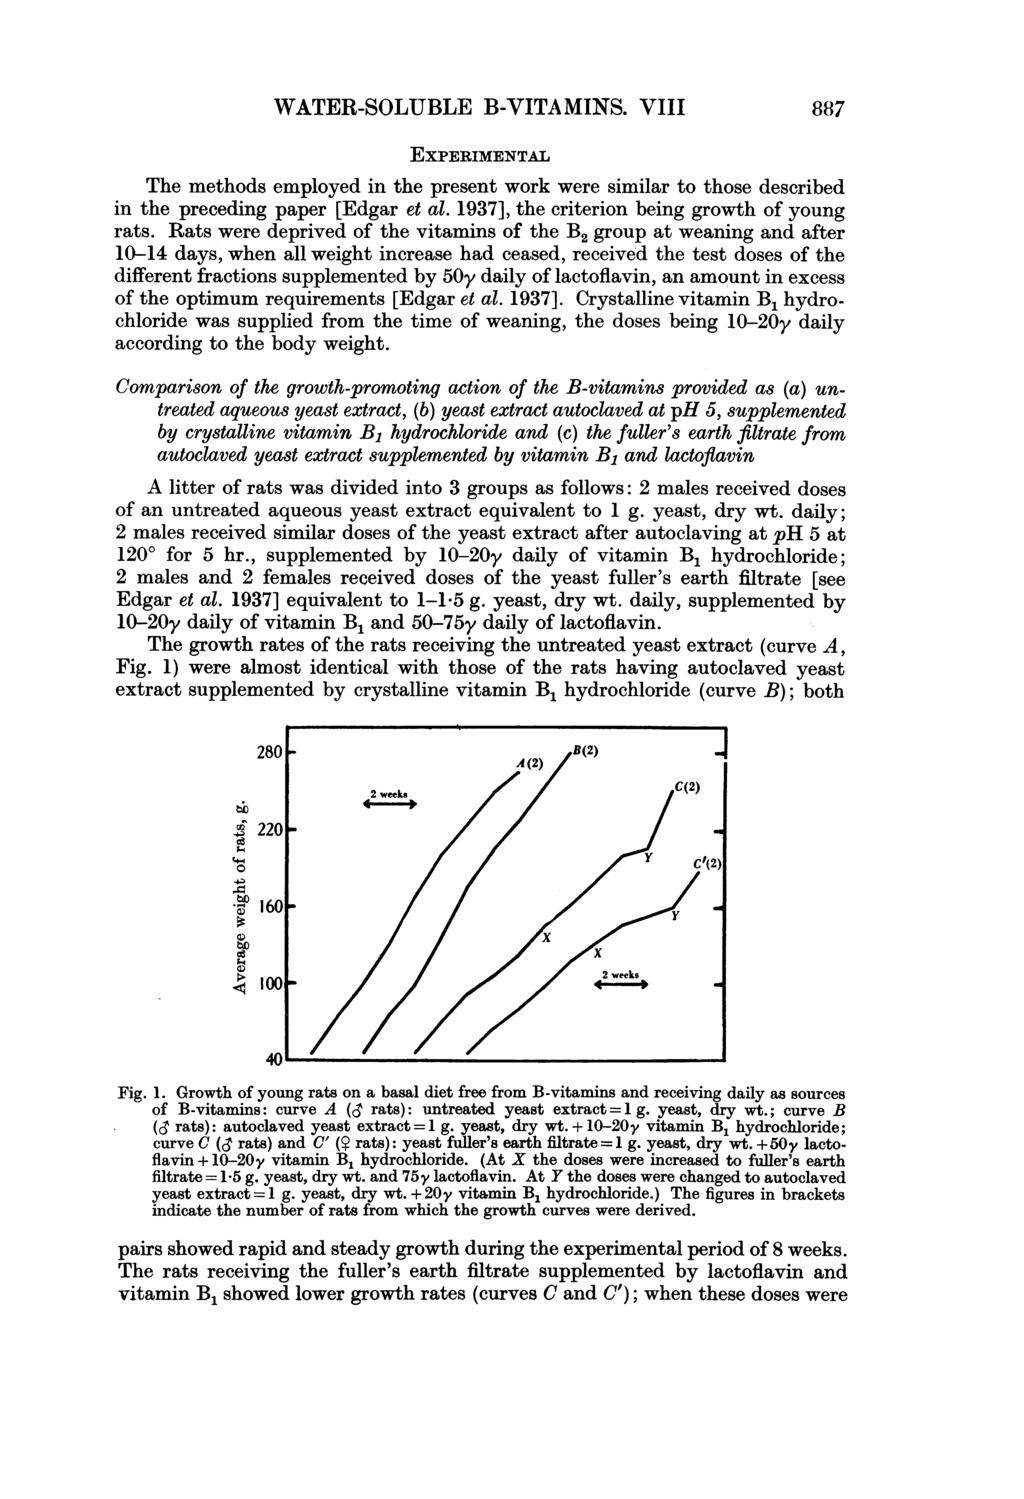 WATER-SOLUBLE B-VITAMINS. VIII 88X7 EXPERIMENTAL The methods employed in the present work were similar to those described in the preceding paper [Edgar et al.